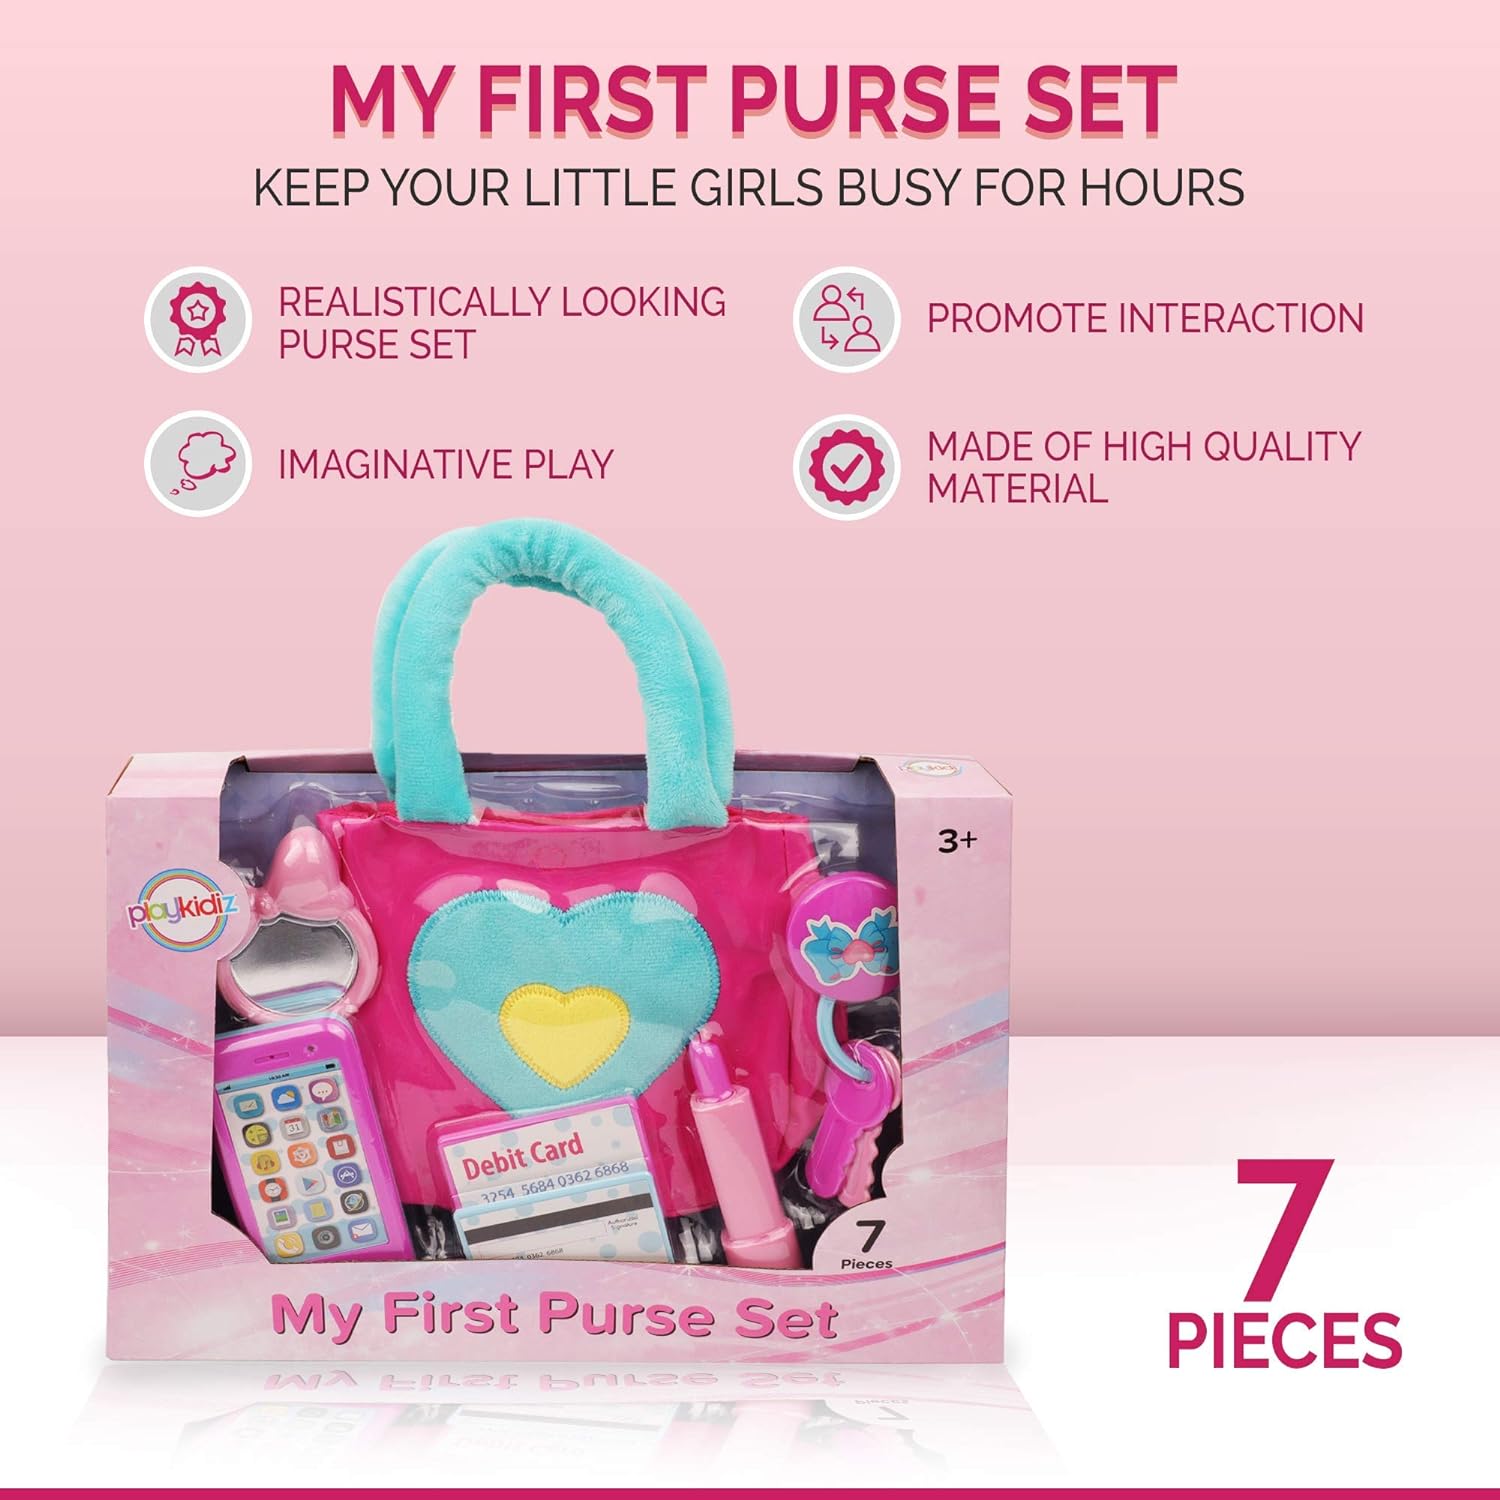 Great Choice Products Princess My First Purse Set - 7 Pieces Kids Play Purse And Accessories, Pretend Play Toy Set With Cool Girl Accessories,…